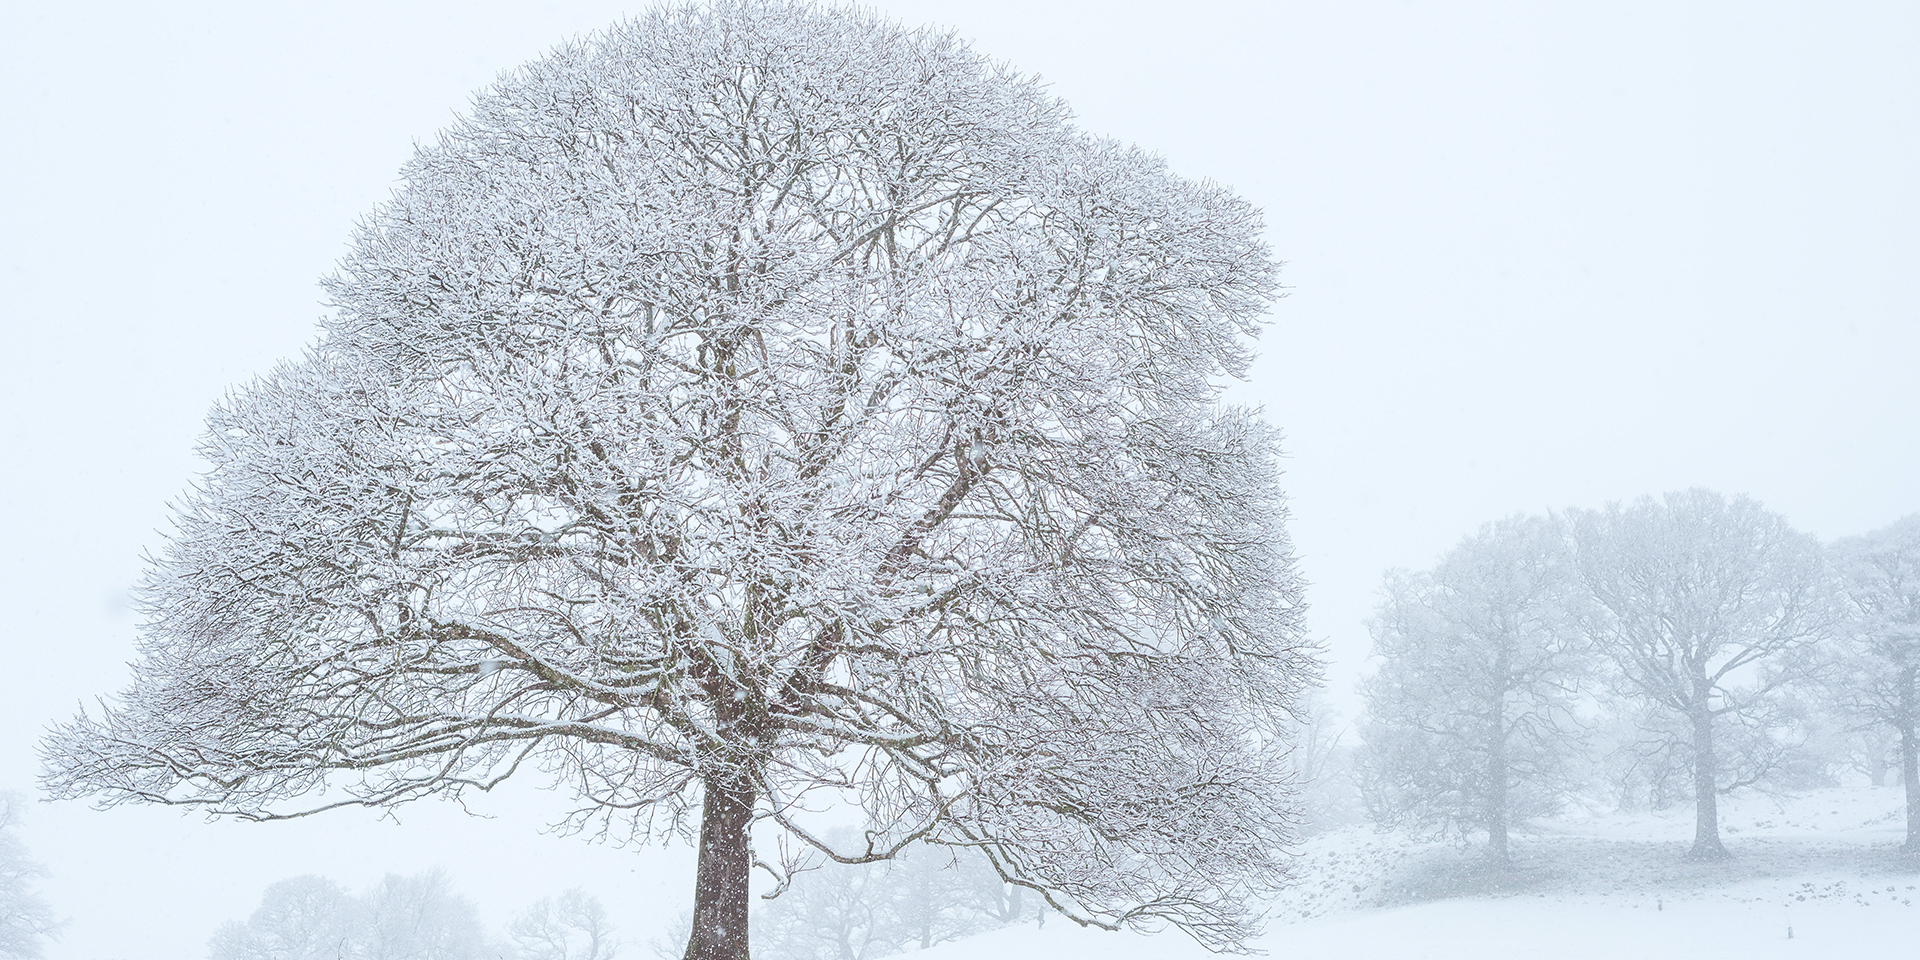 Let it snow: 6 of the best descriptions of winter weather in